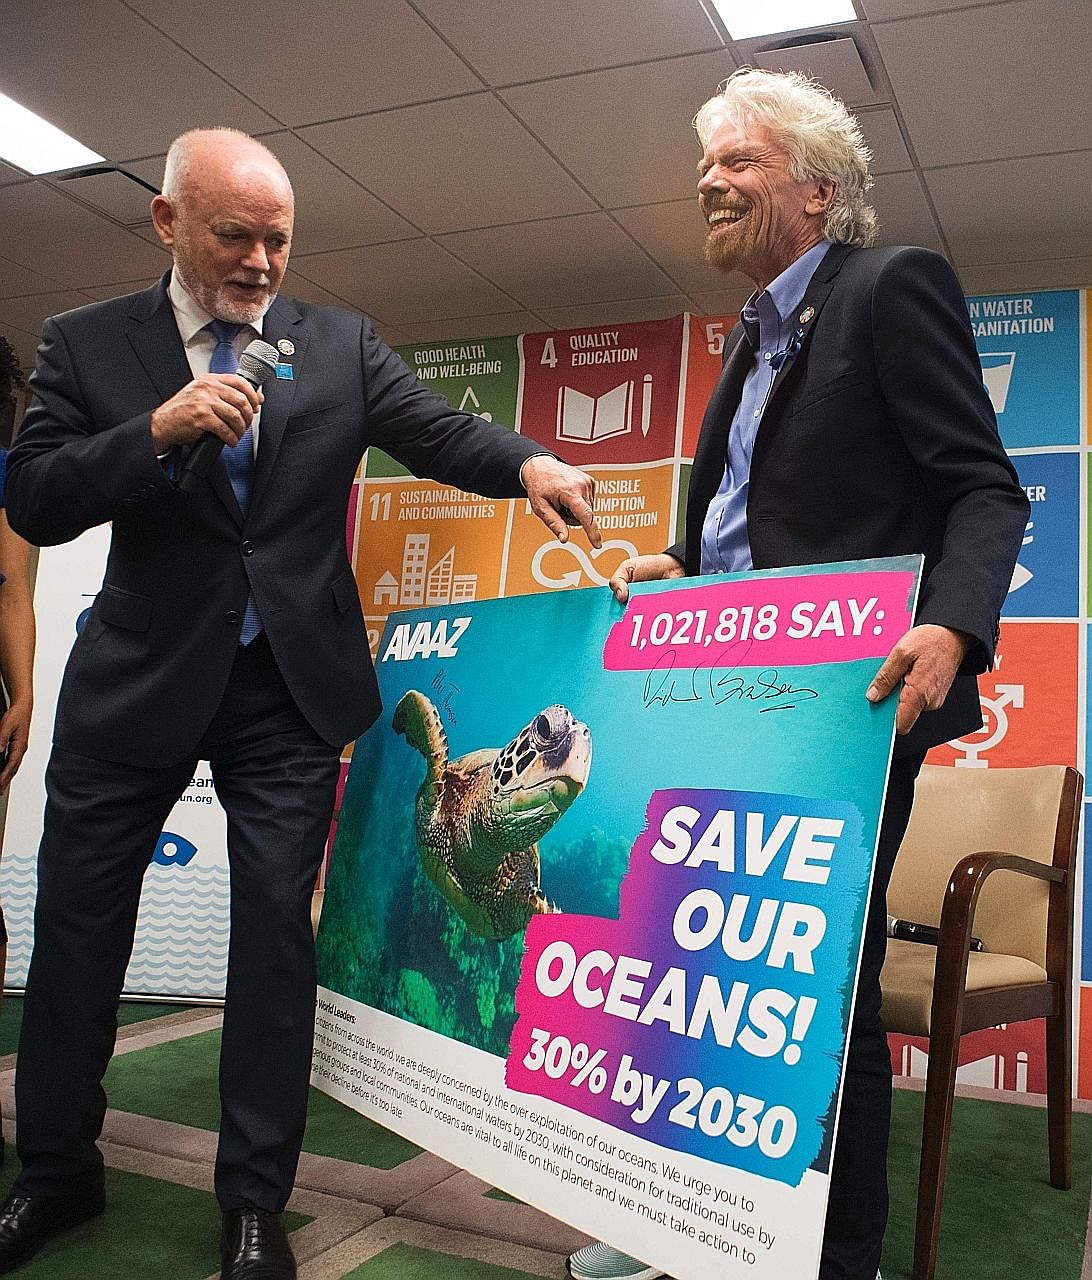 UN General Assembly president Peter Thomson (far left) and Mr Richard Branson with the petition carrying over one million signatures. The petition urges governments to protect at least 30 per cent of the world's oceans by 2030.